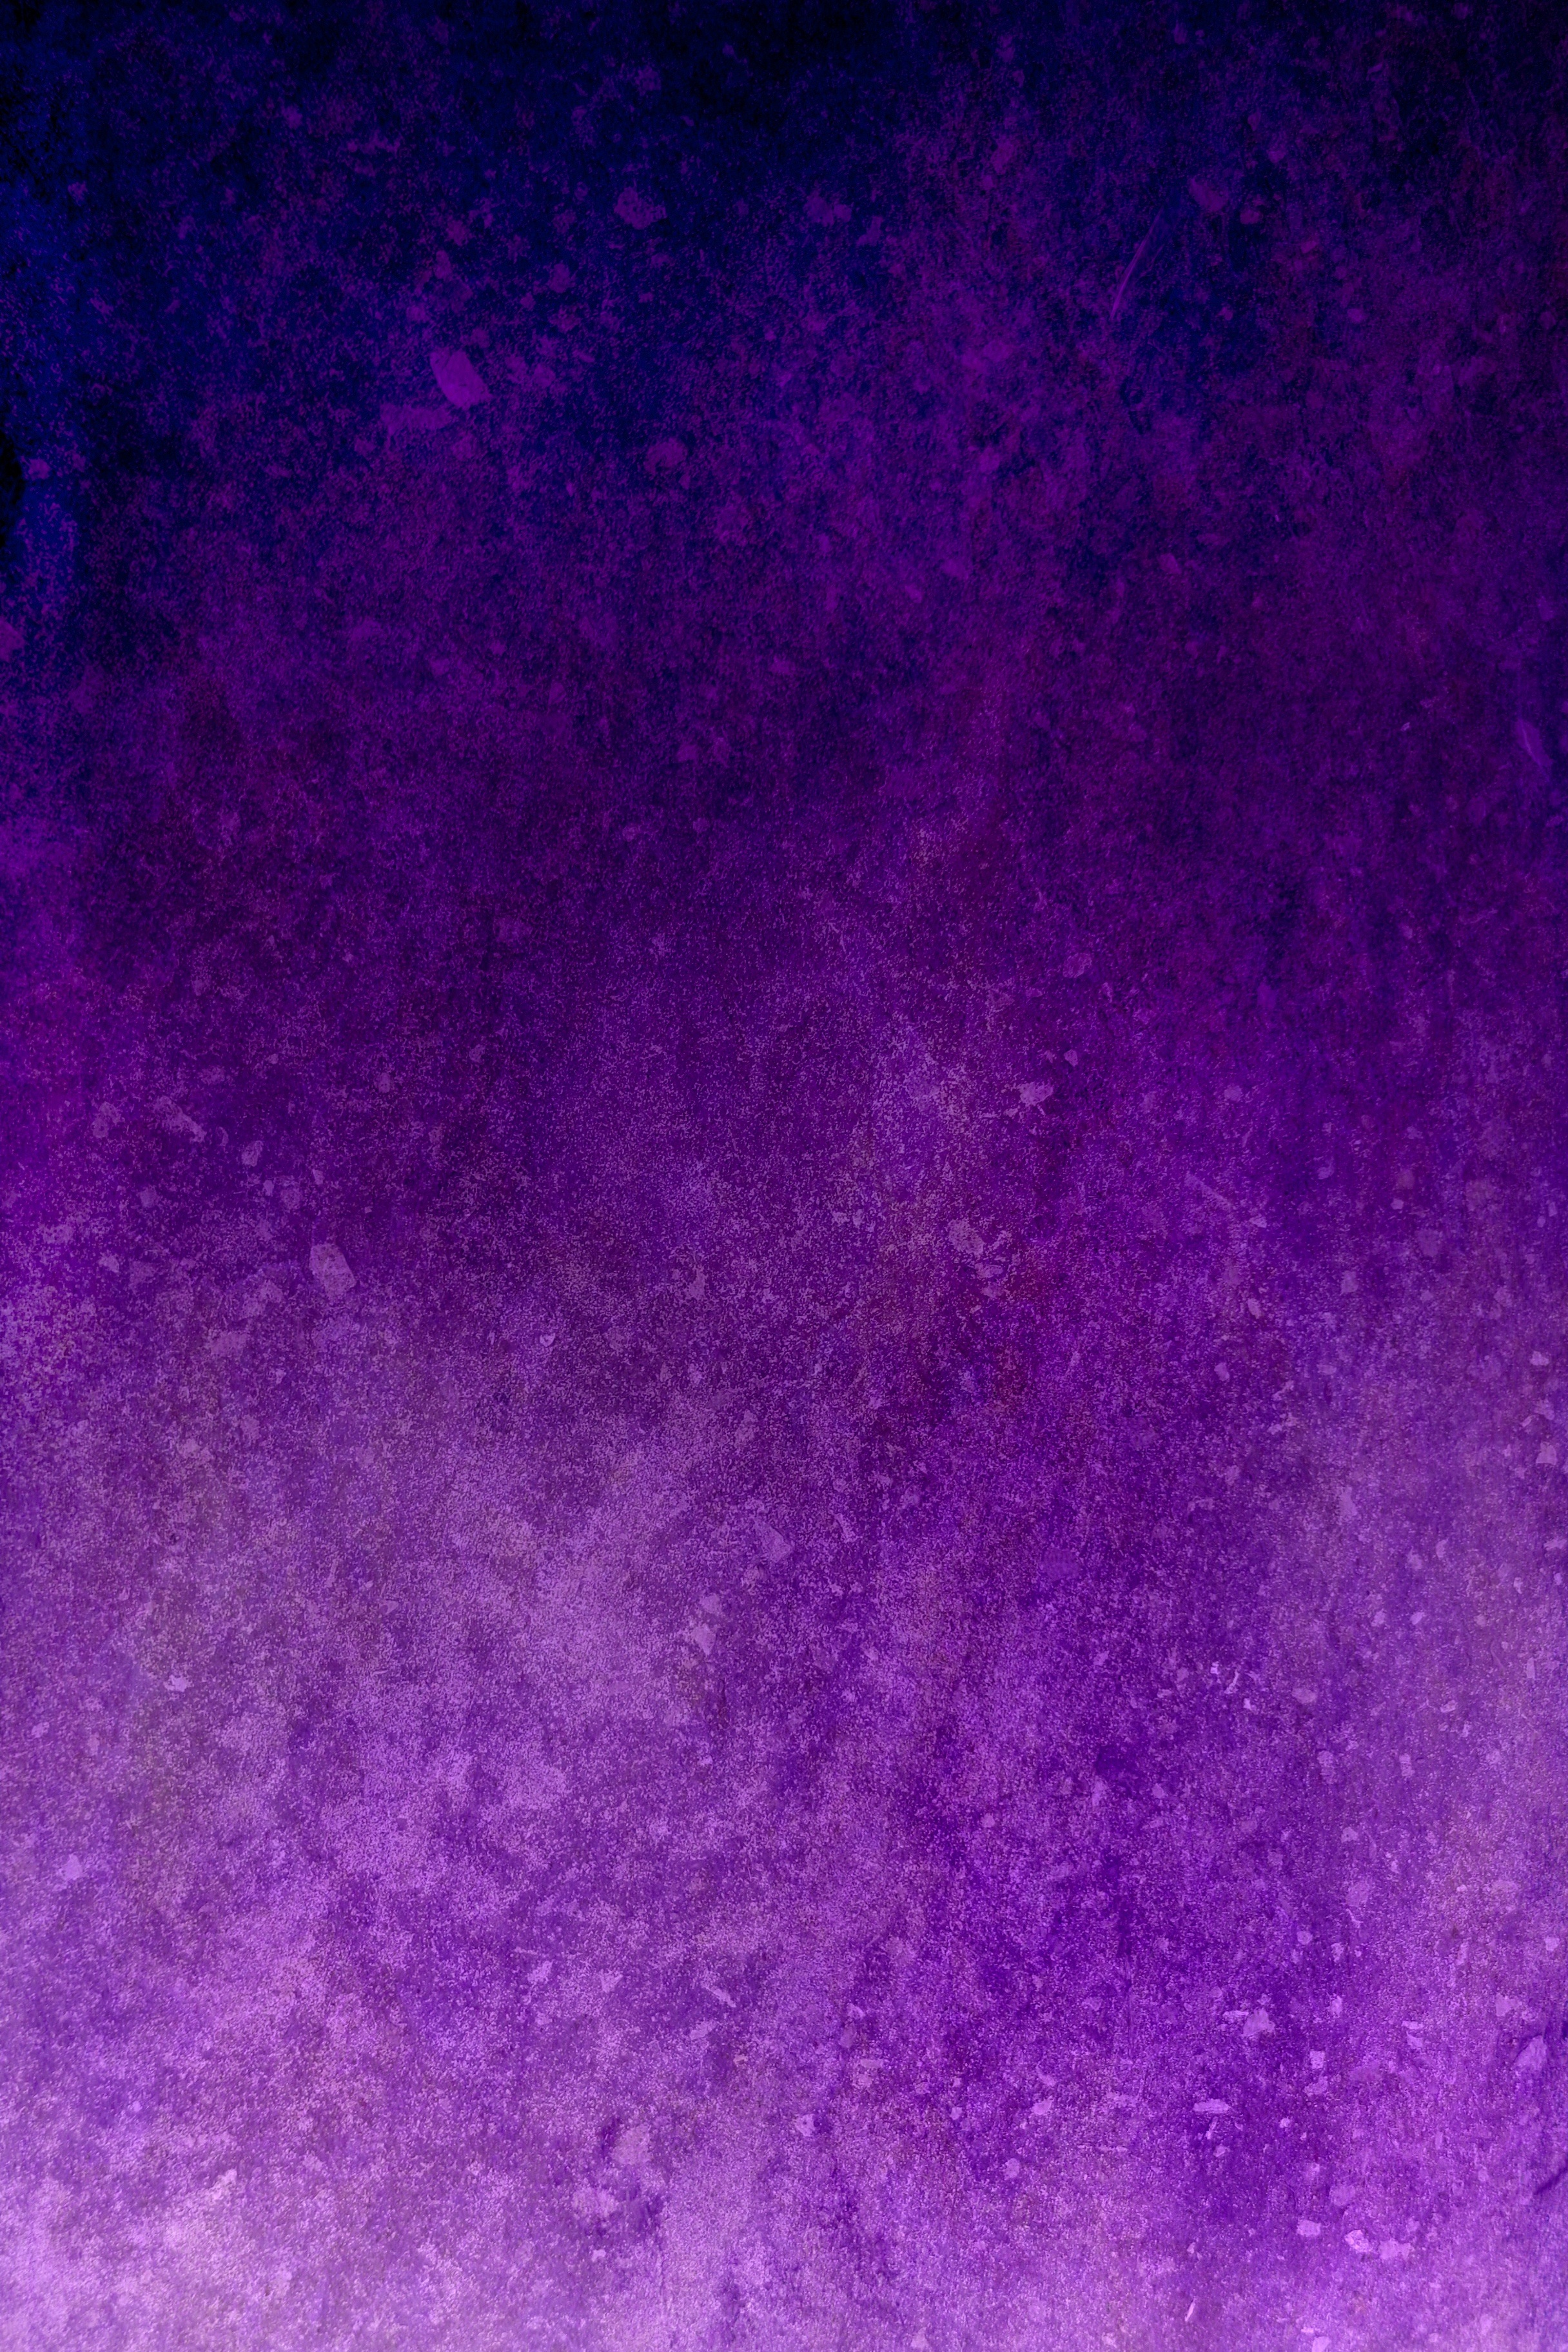 purple, violet, shade, tint, textures, texture, background, stains, spots